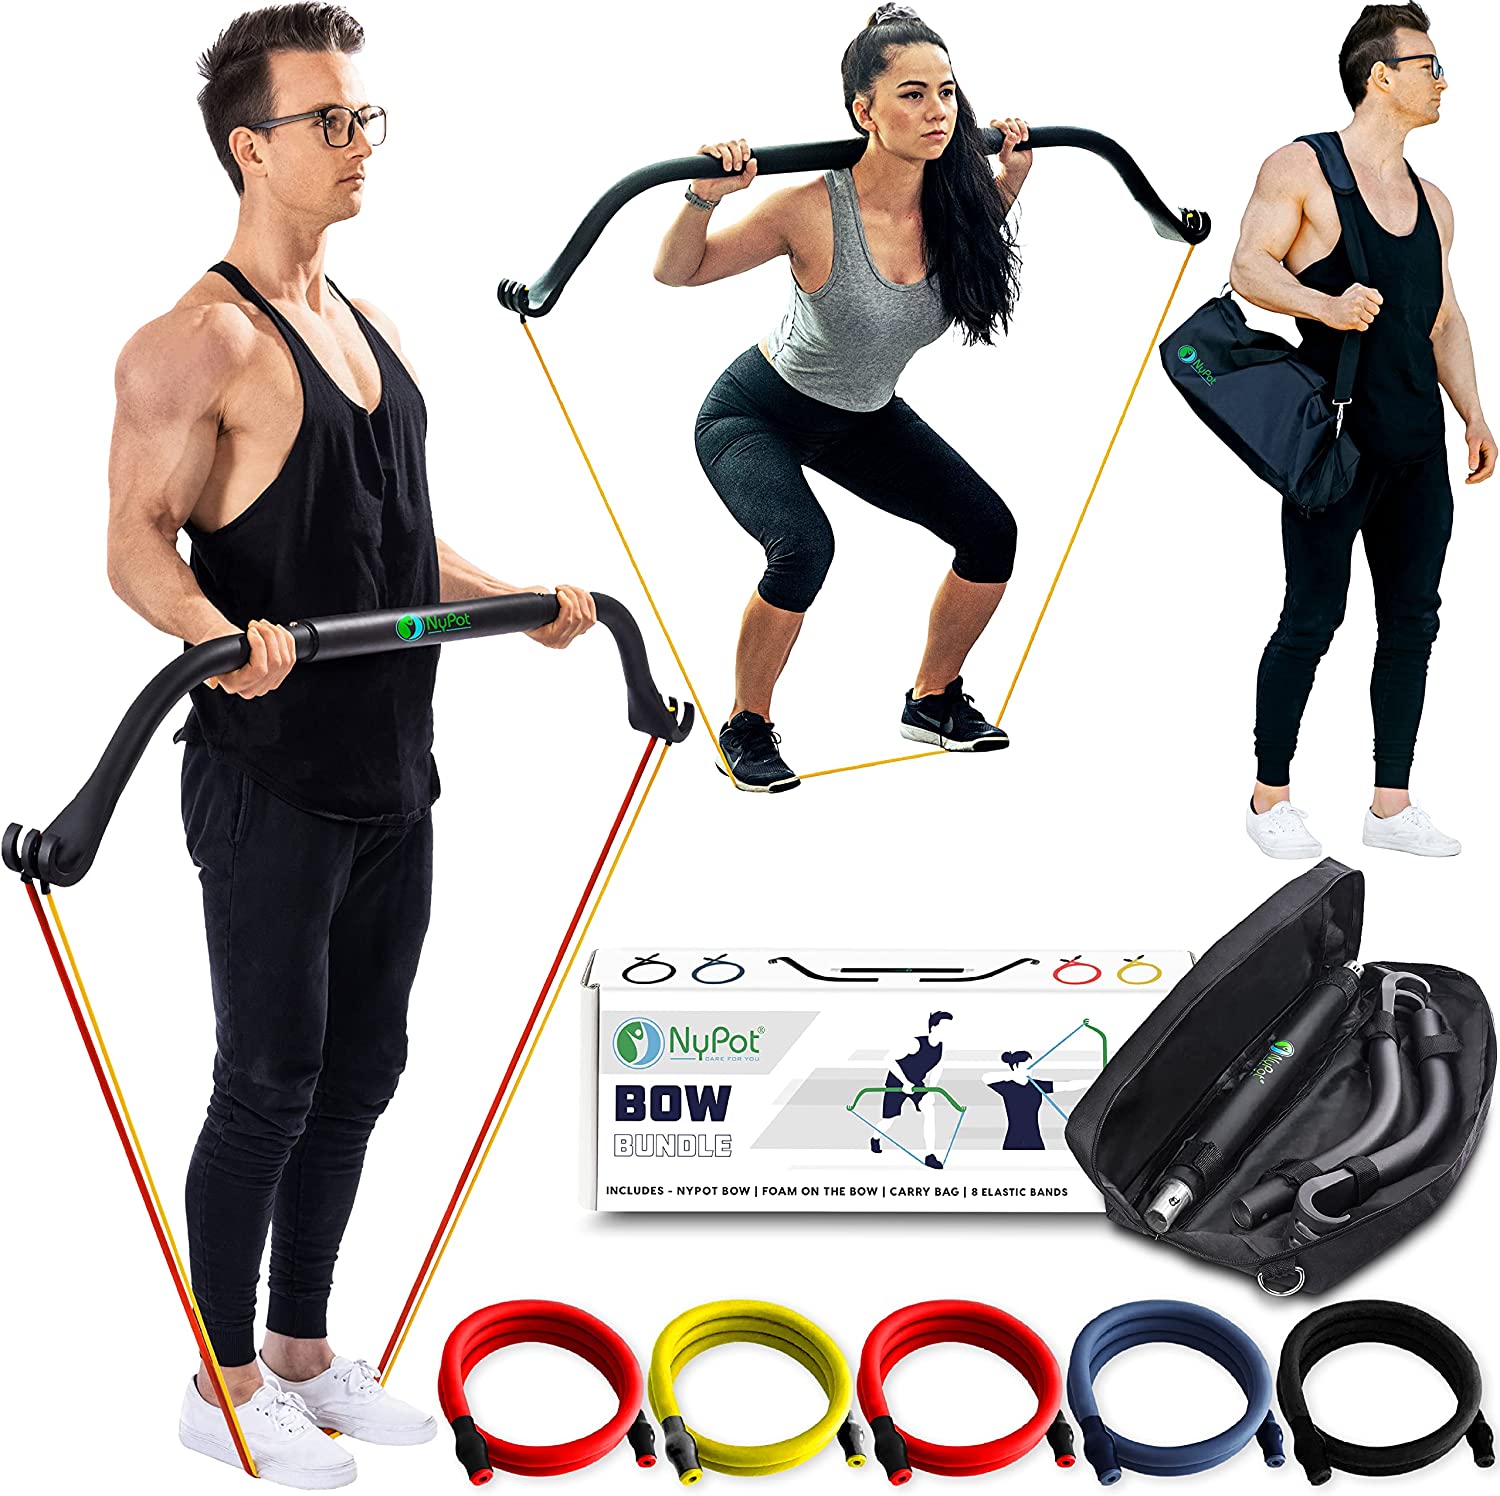 NYPOT Bow Portable Home Gym - Resistance Band and Bar System - Travel Workout Equipment Set - Home Workout Resistance Bands - Full Body Training Kit & Exercise Equipment for Men & Women